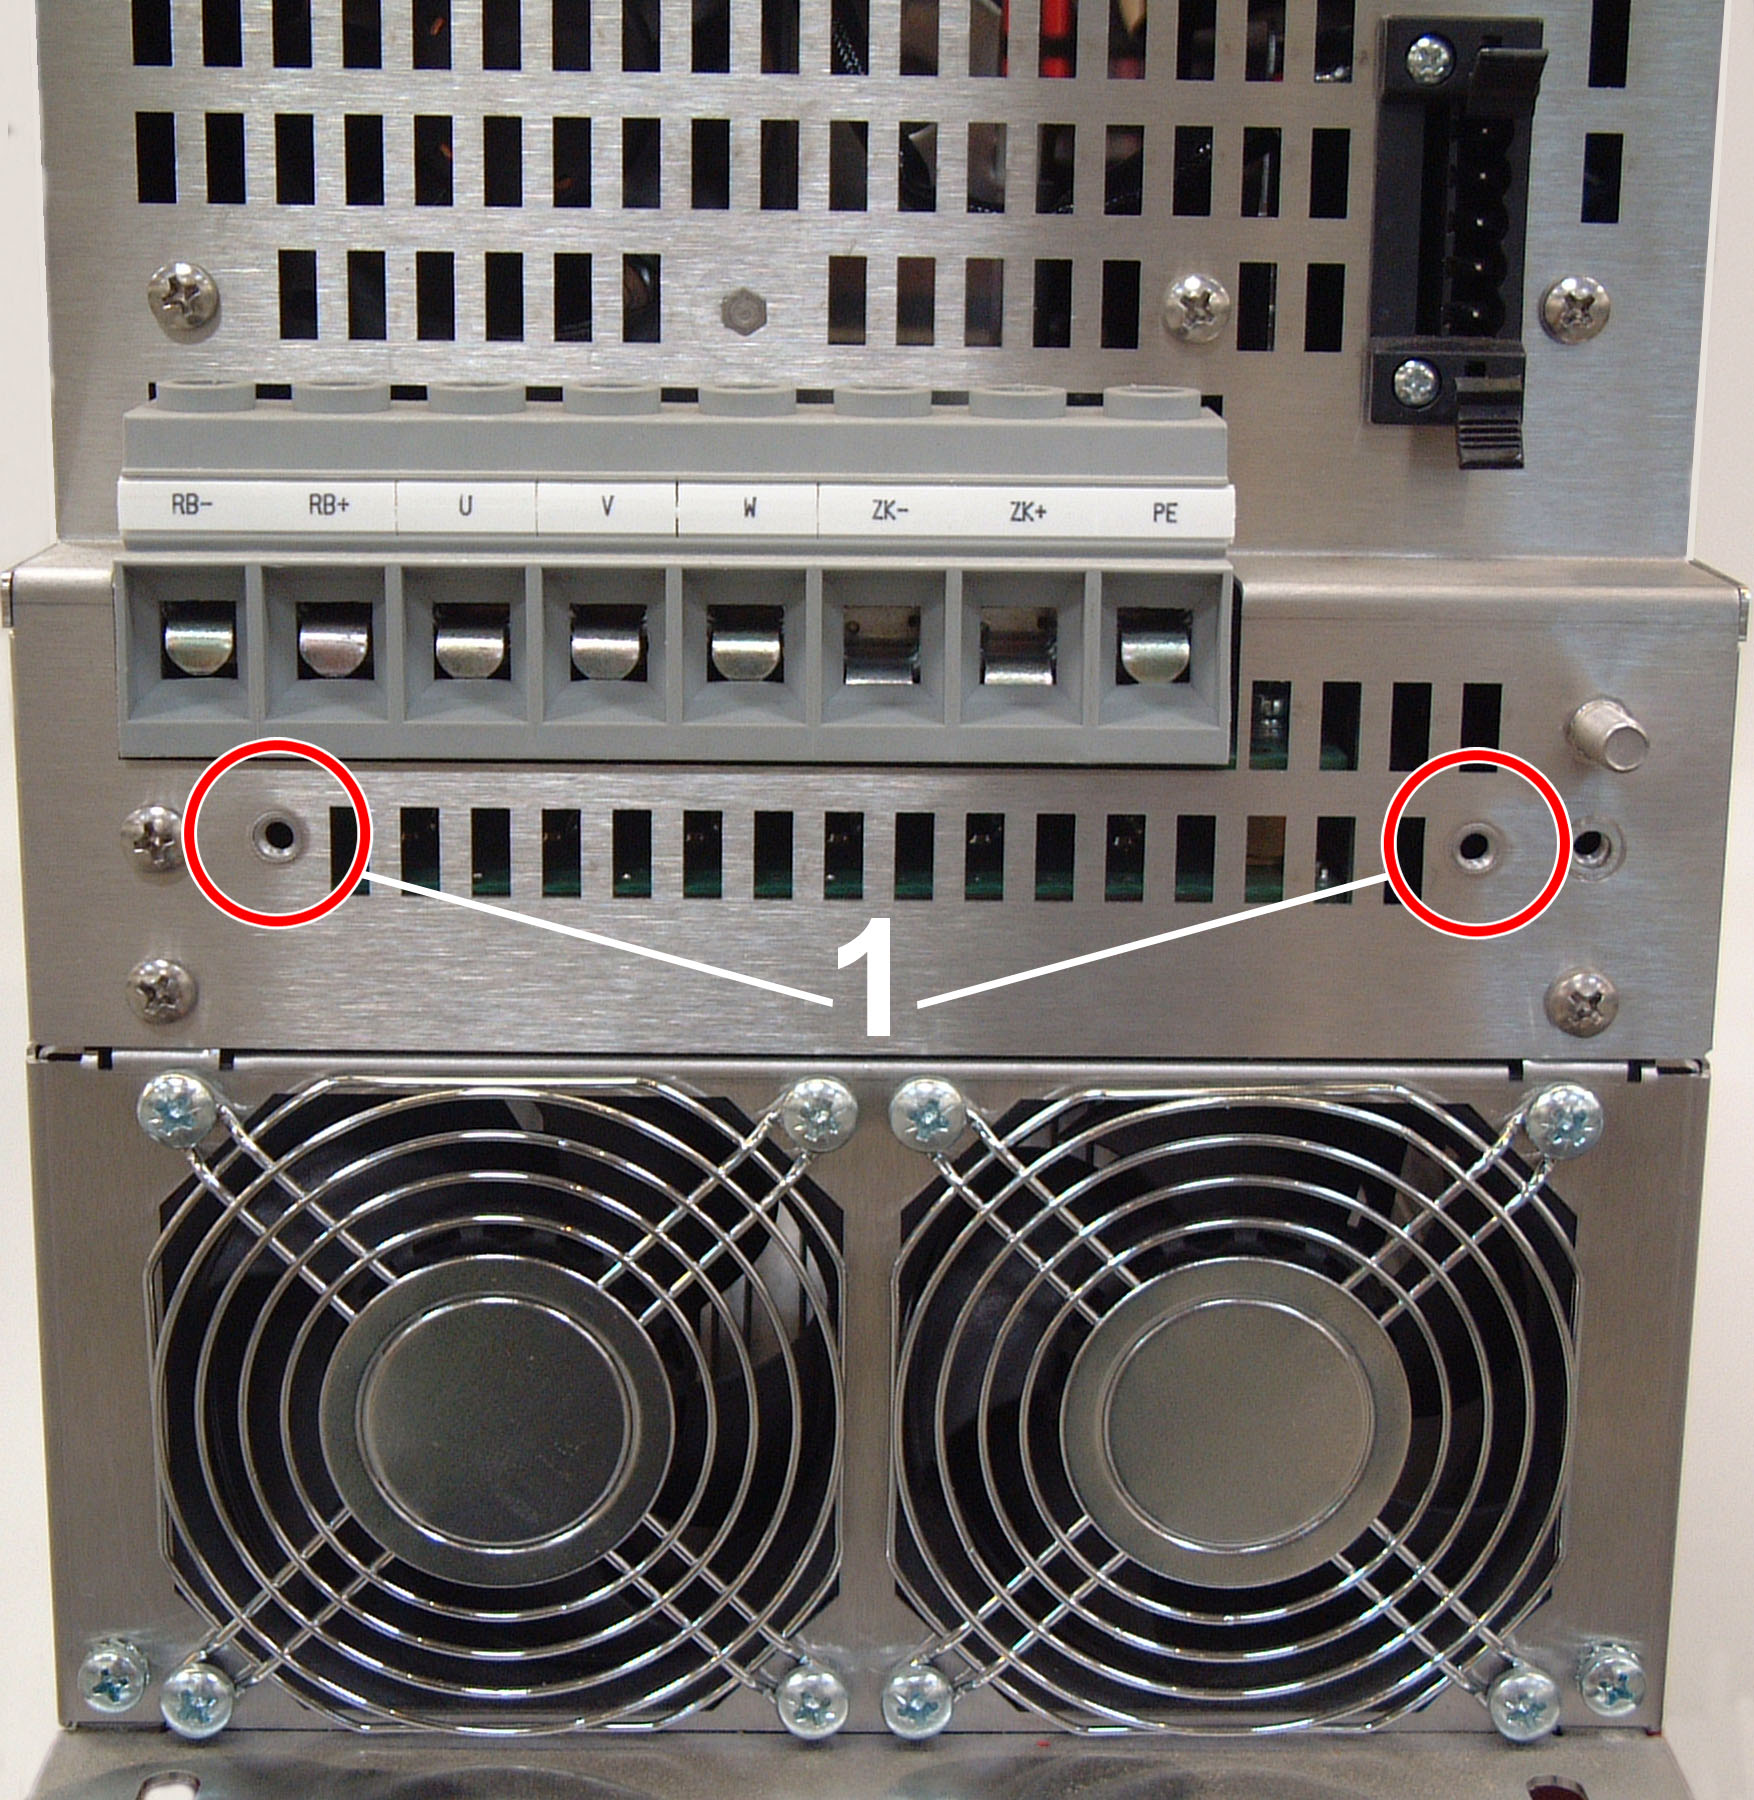 Installation examples (60 A - 170 A devices) 3: